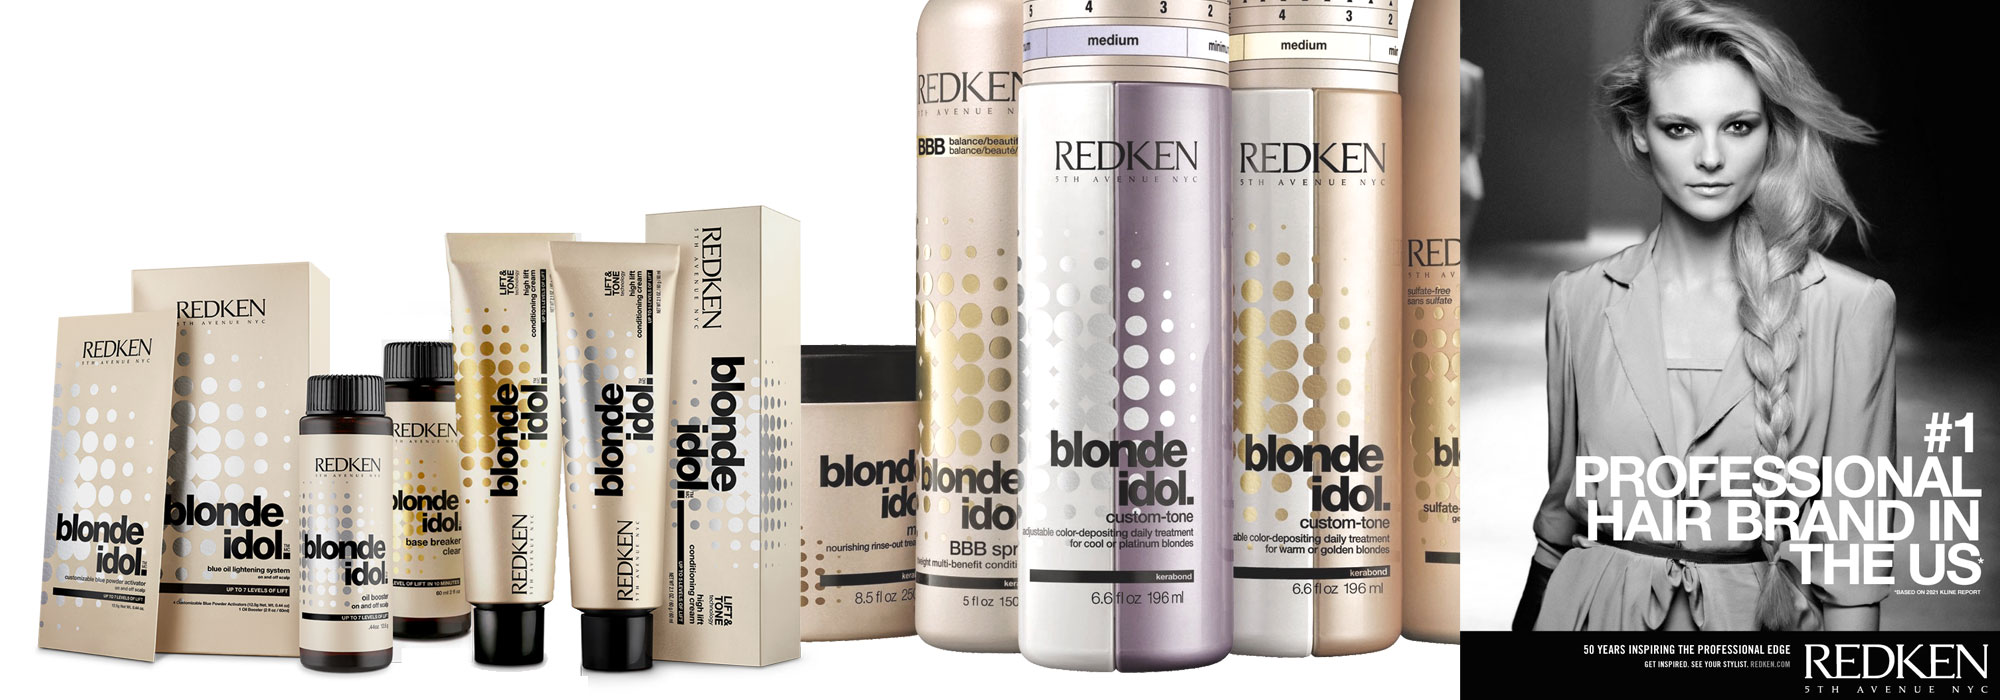 Redken branding and packaging designed by MPAKT